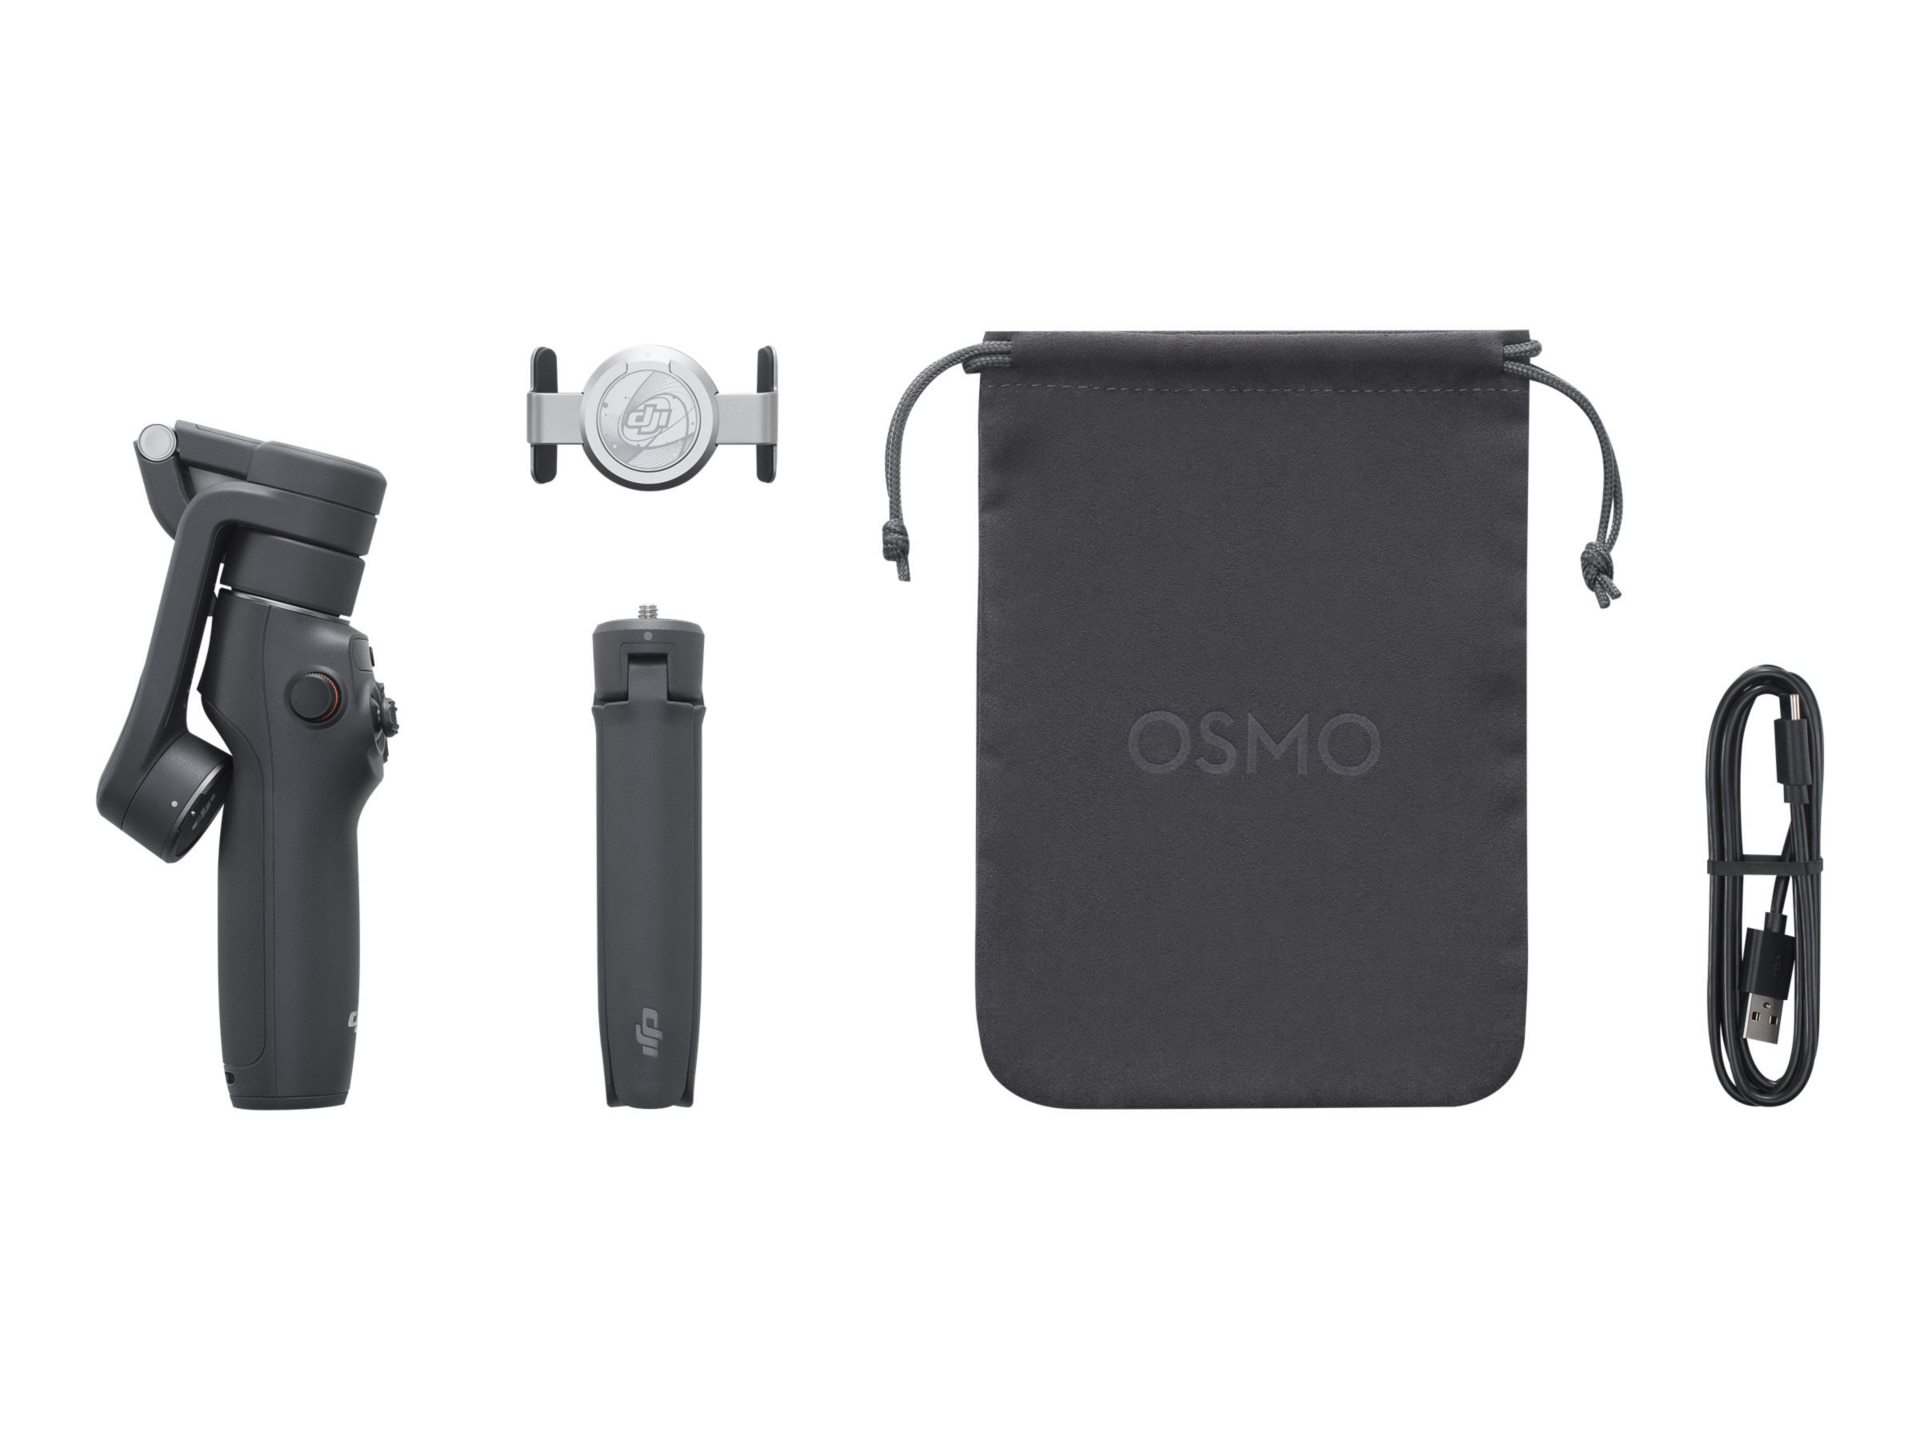 DJI Osmo Mobile Gimbal - Cell phones & accessories